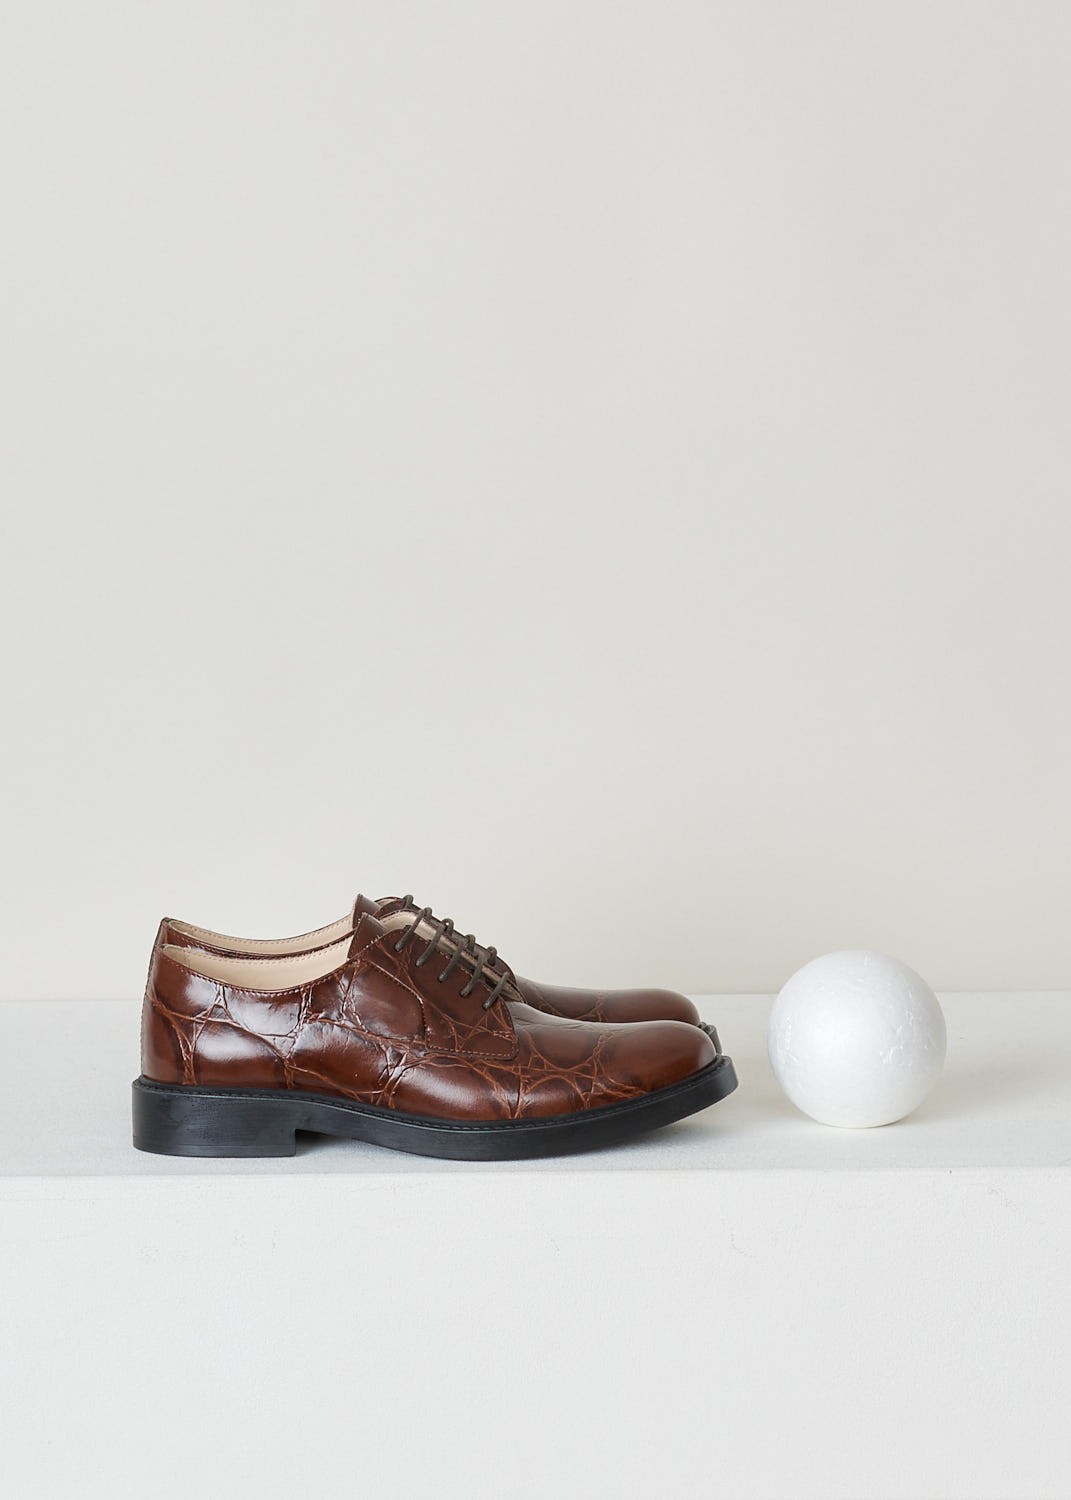 TODS,  MAROON COLORED DERBY SHOES, XXW59C0DD20XLXS603_GOMMA_BASSO_59C_ALLACCIATA_XLX_CASTAGNA, Red, Brown, Side, These maroon colored leather derby shoes have a wrinkle-like motive. These shoes have a classic lace-up closing.

Heel height: 2.5 cm / 0.9 inch 
